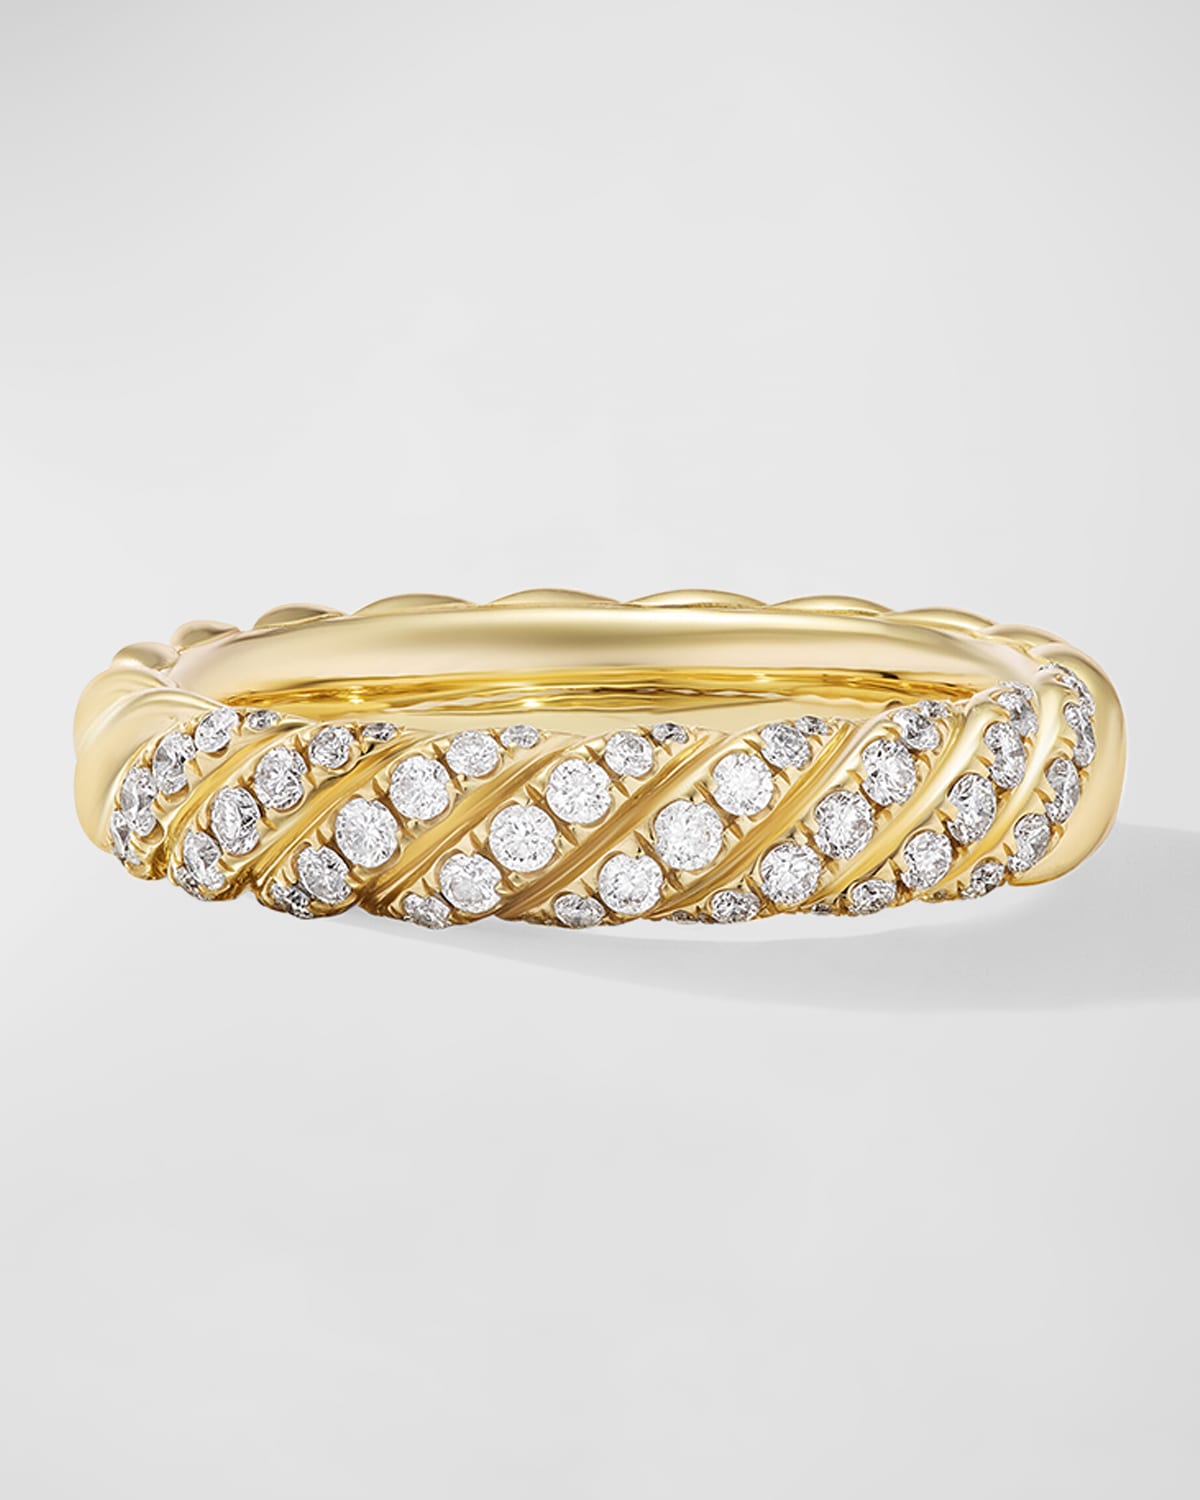 David Yurman Sculpted Cable Band Ring with Diamonds in 18K Gold, 4.5mm, Size 9